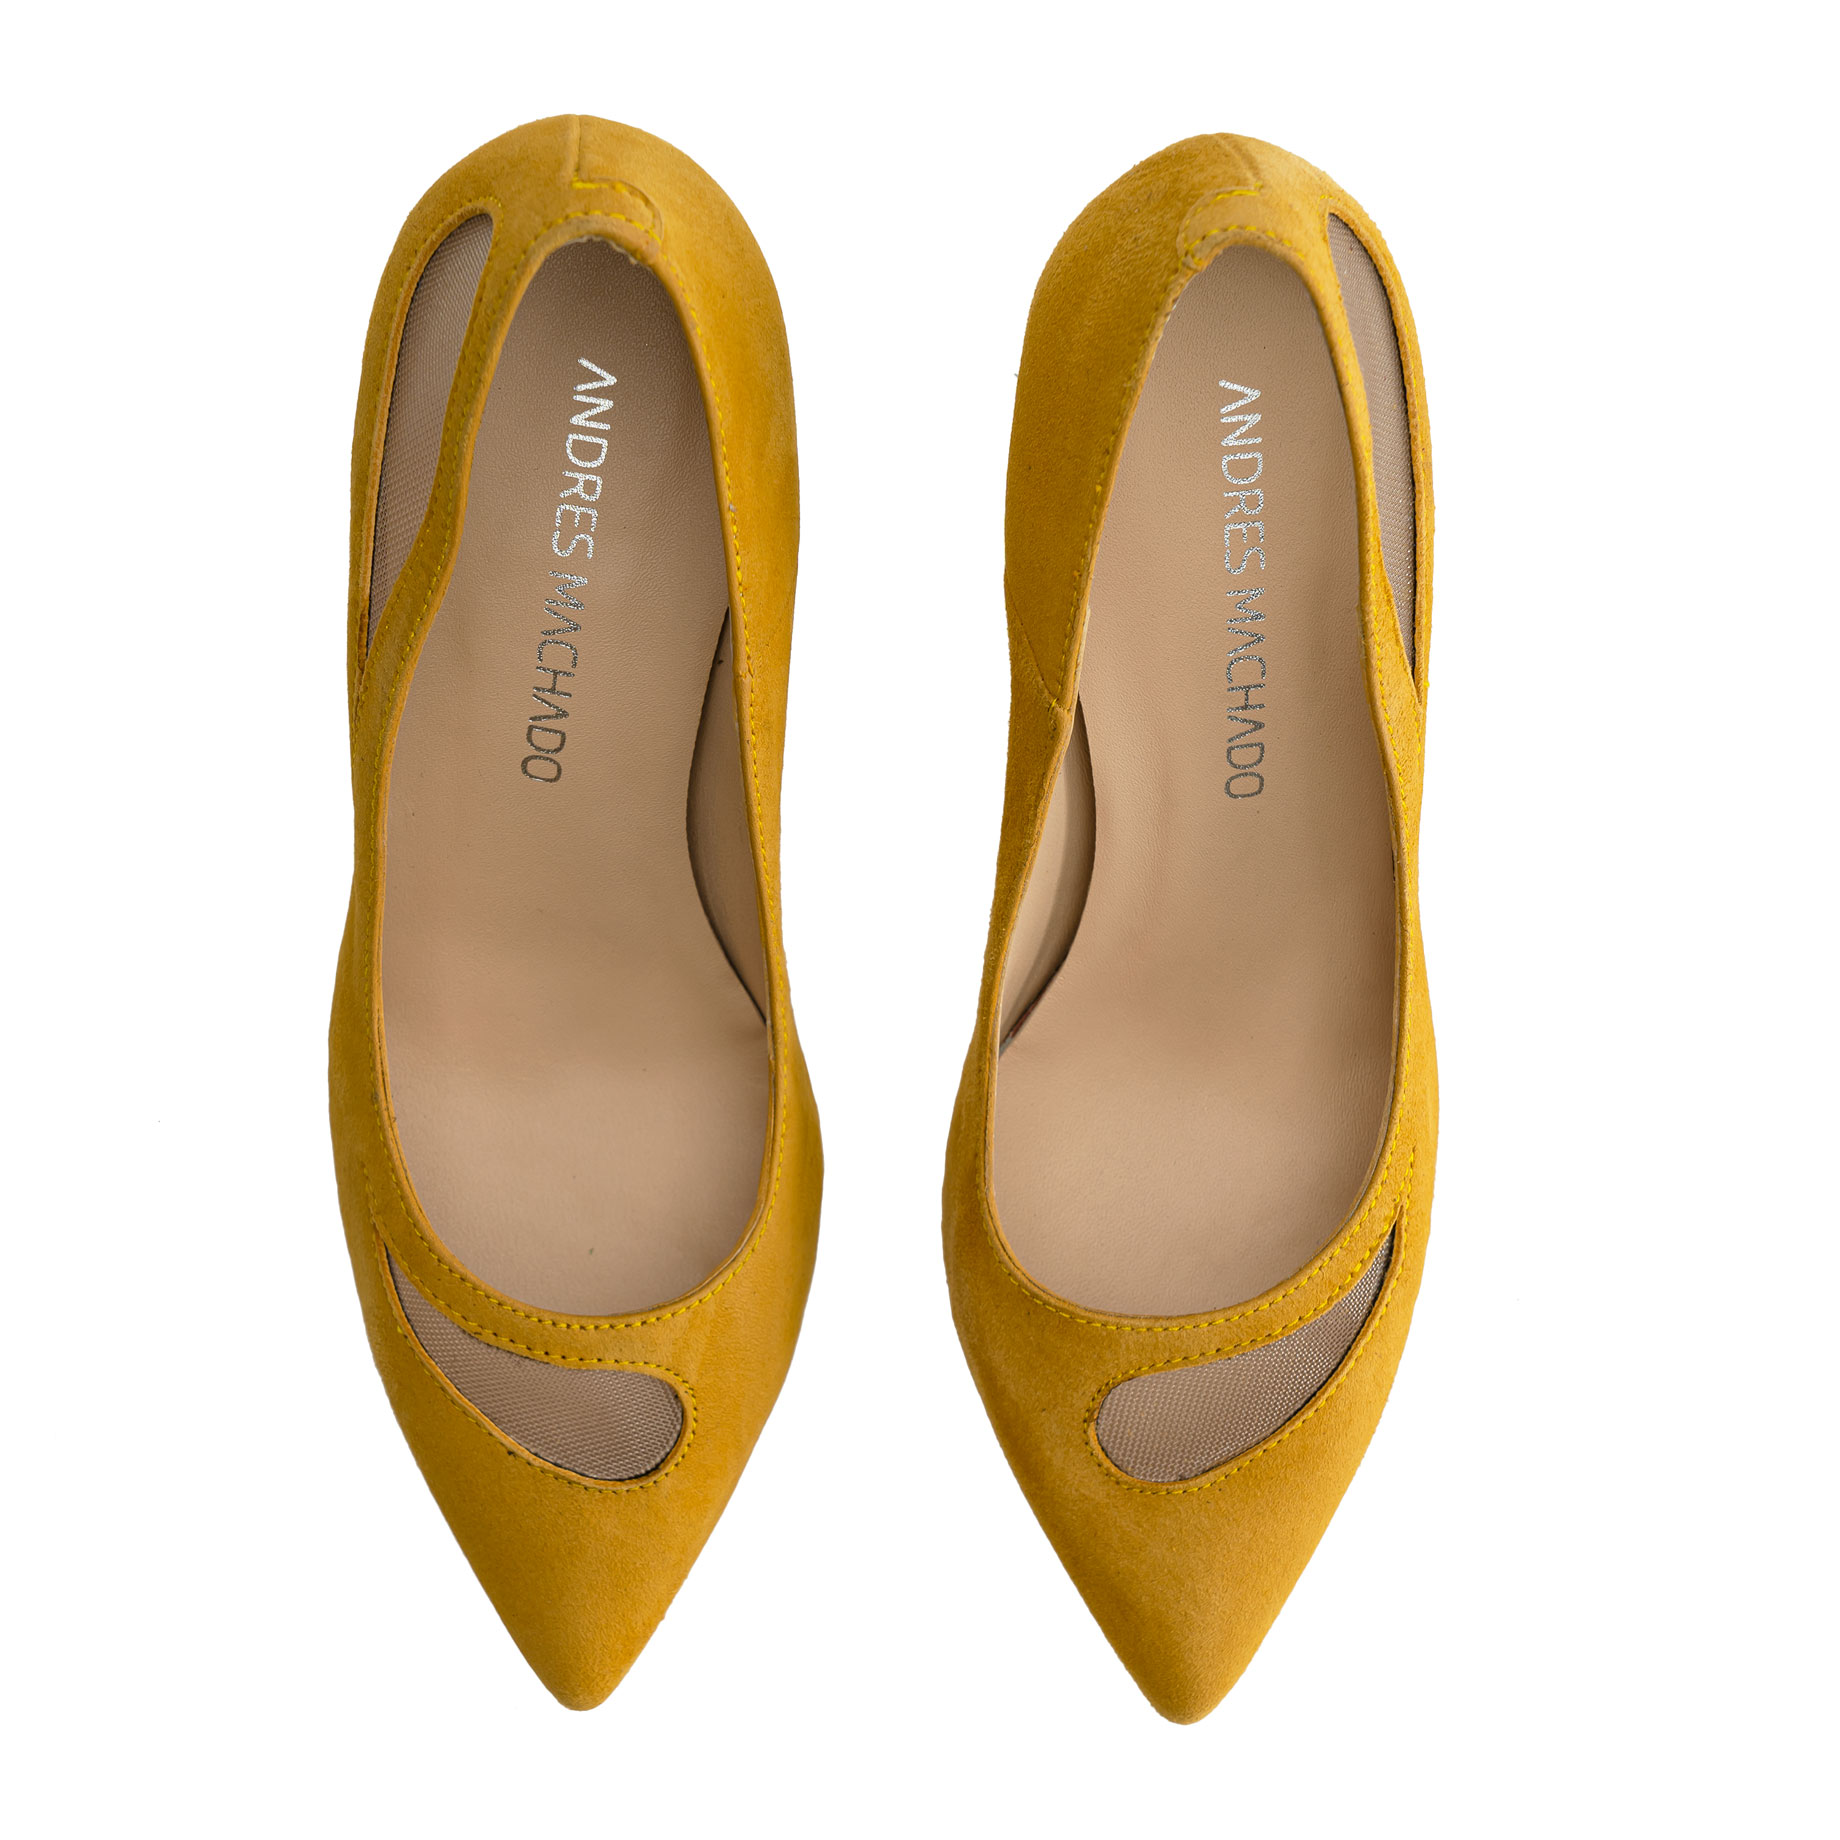 Mesh Stilettos in Mustard Yellow Suede Leather - Exclusive Leather ...